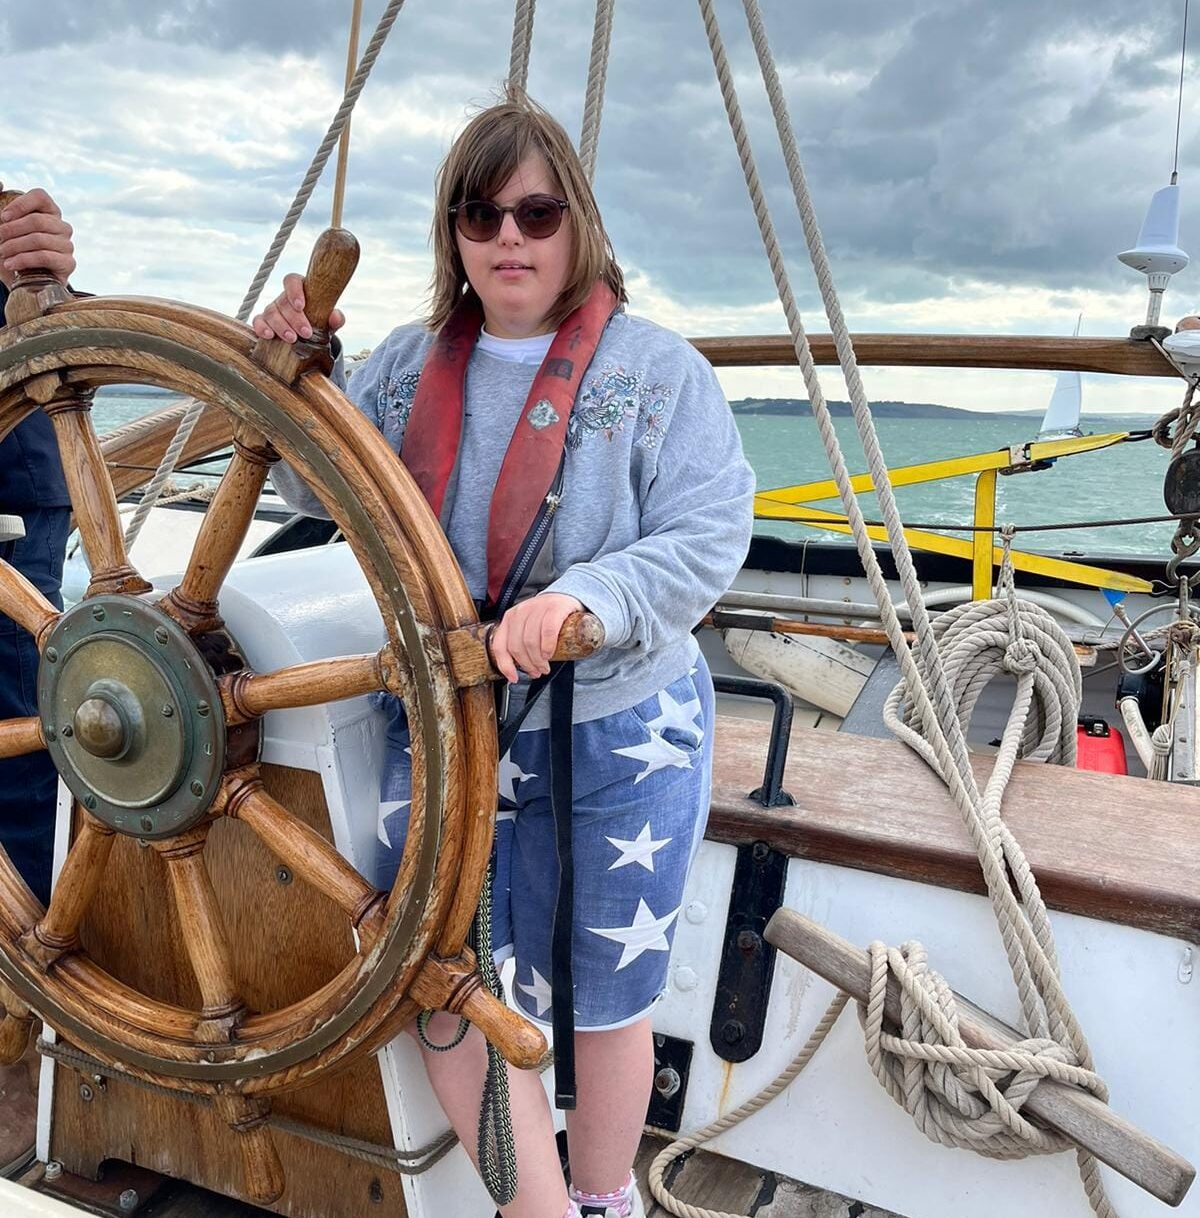 Young person steering the boat using the large wooden wheel.